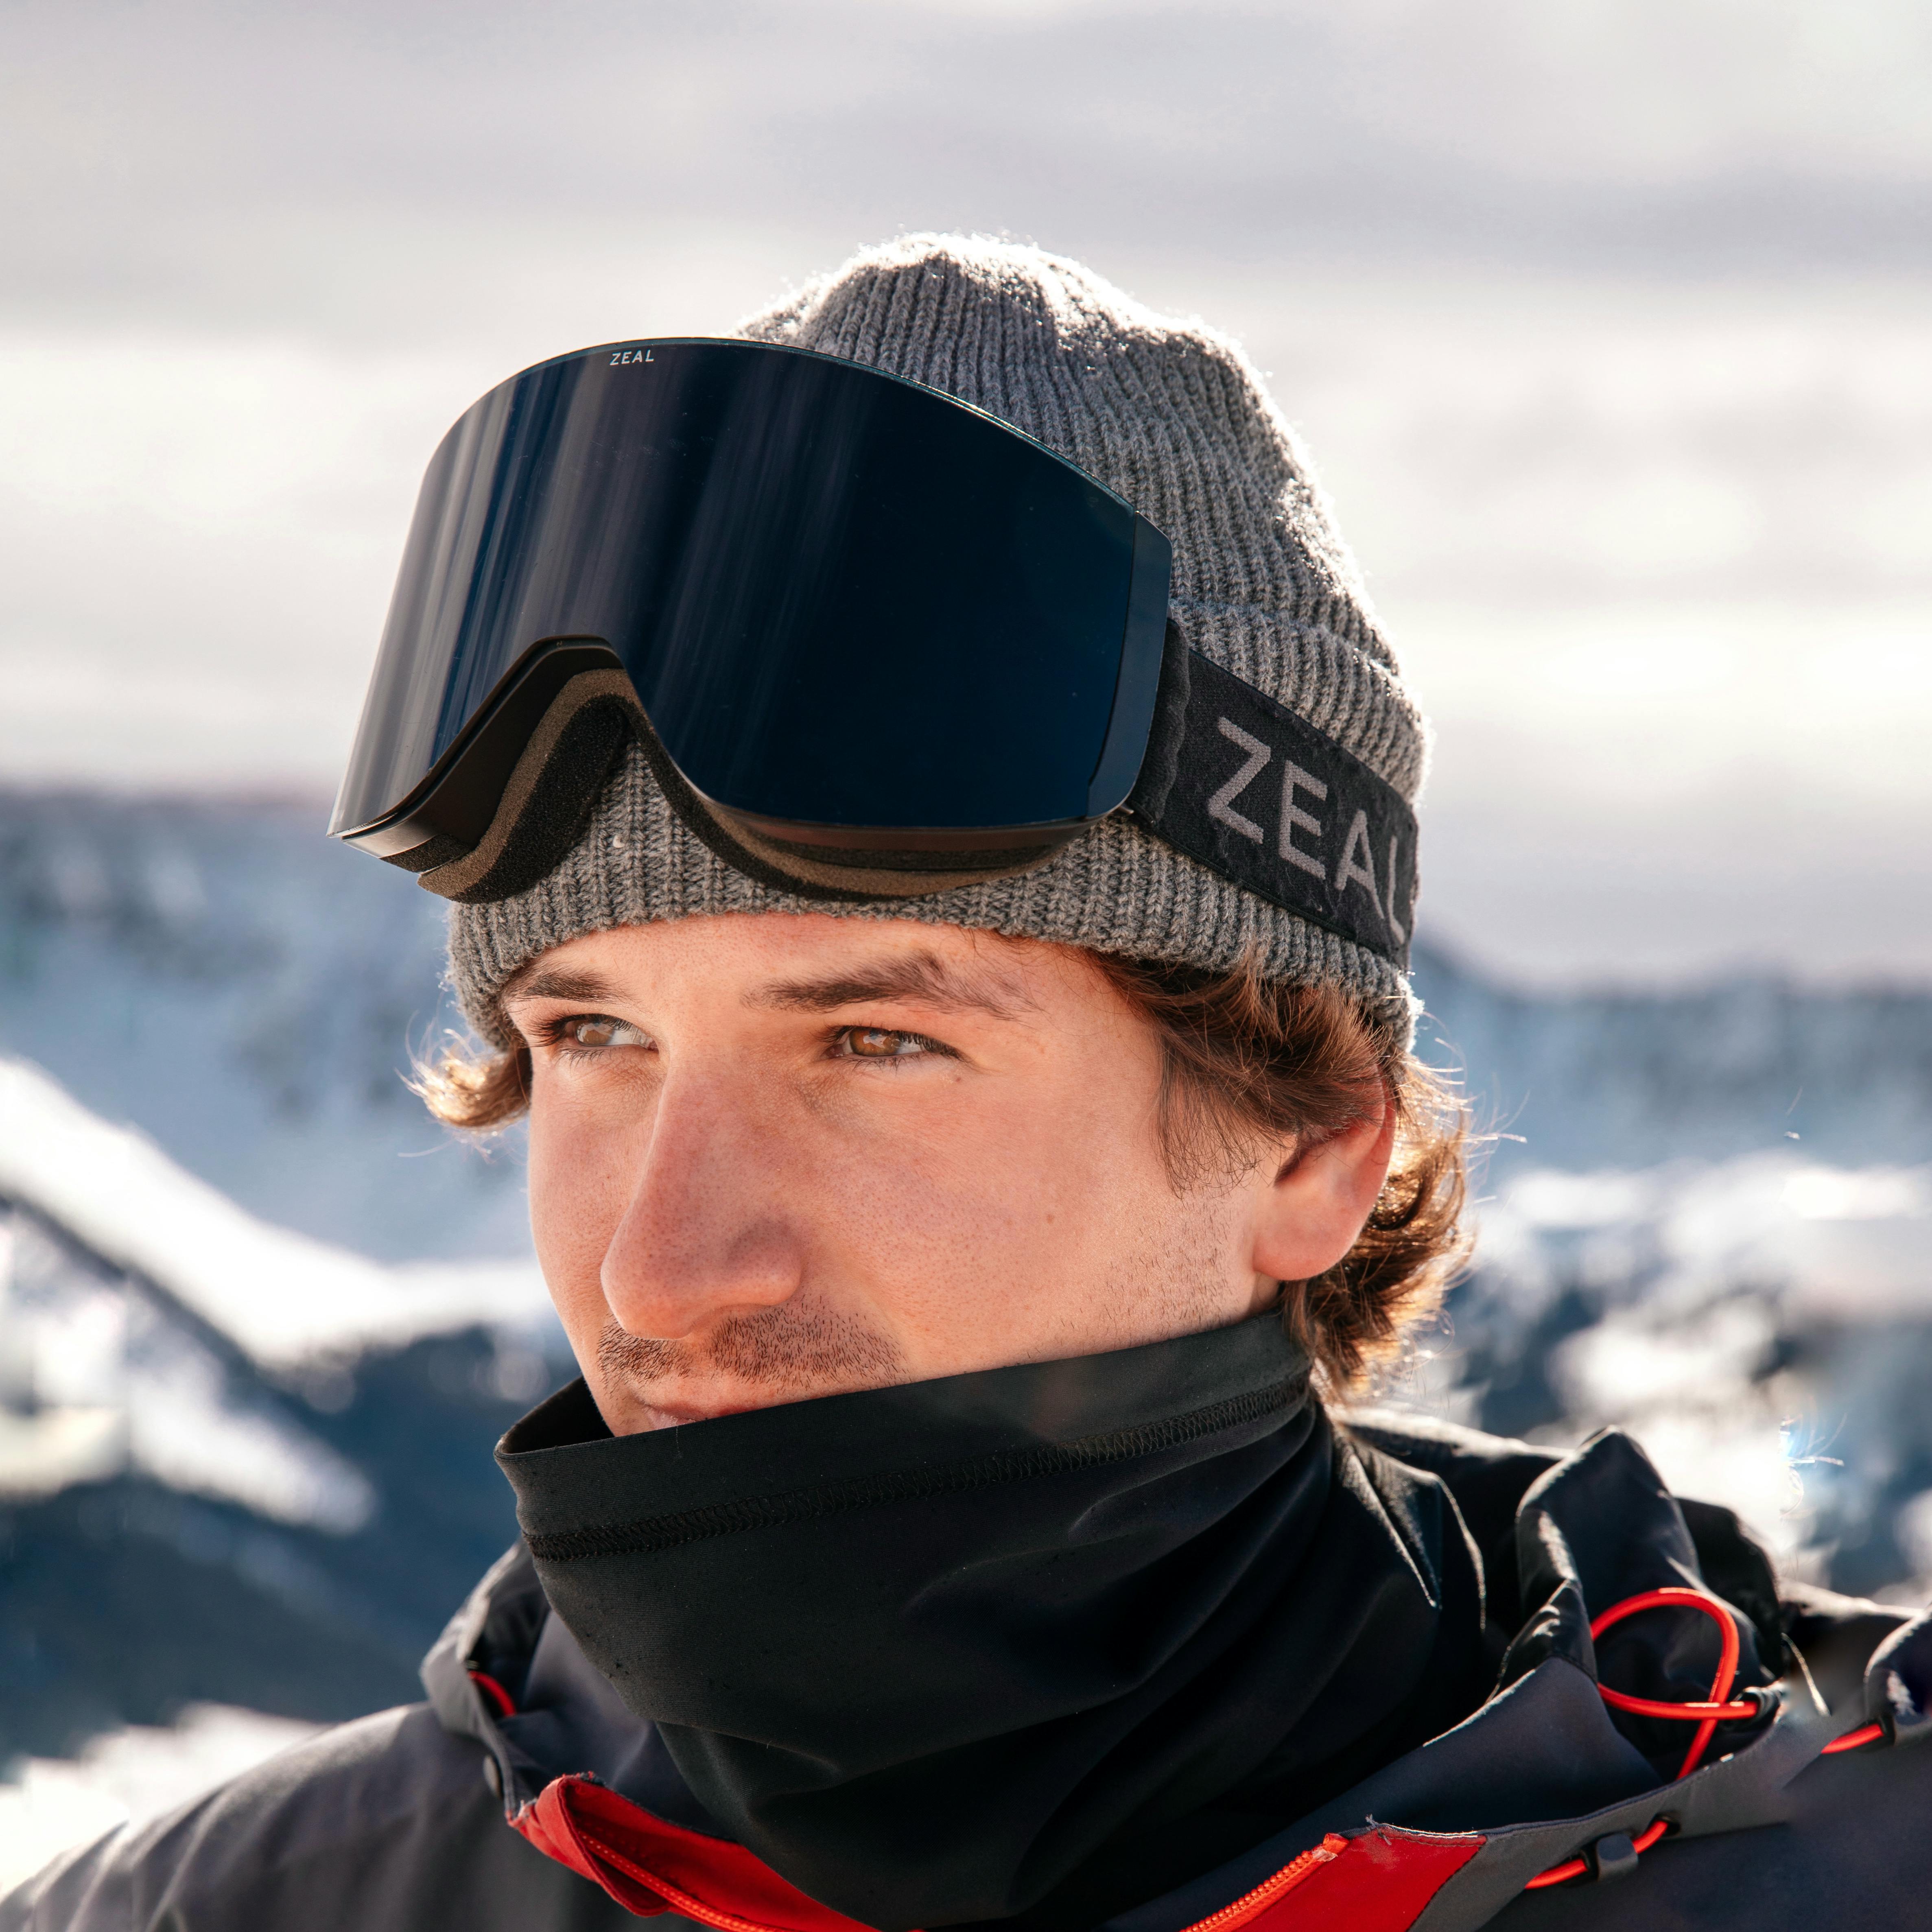 What to Wear Under Your Ski Pants